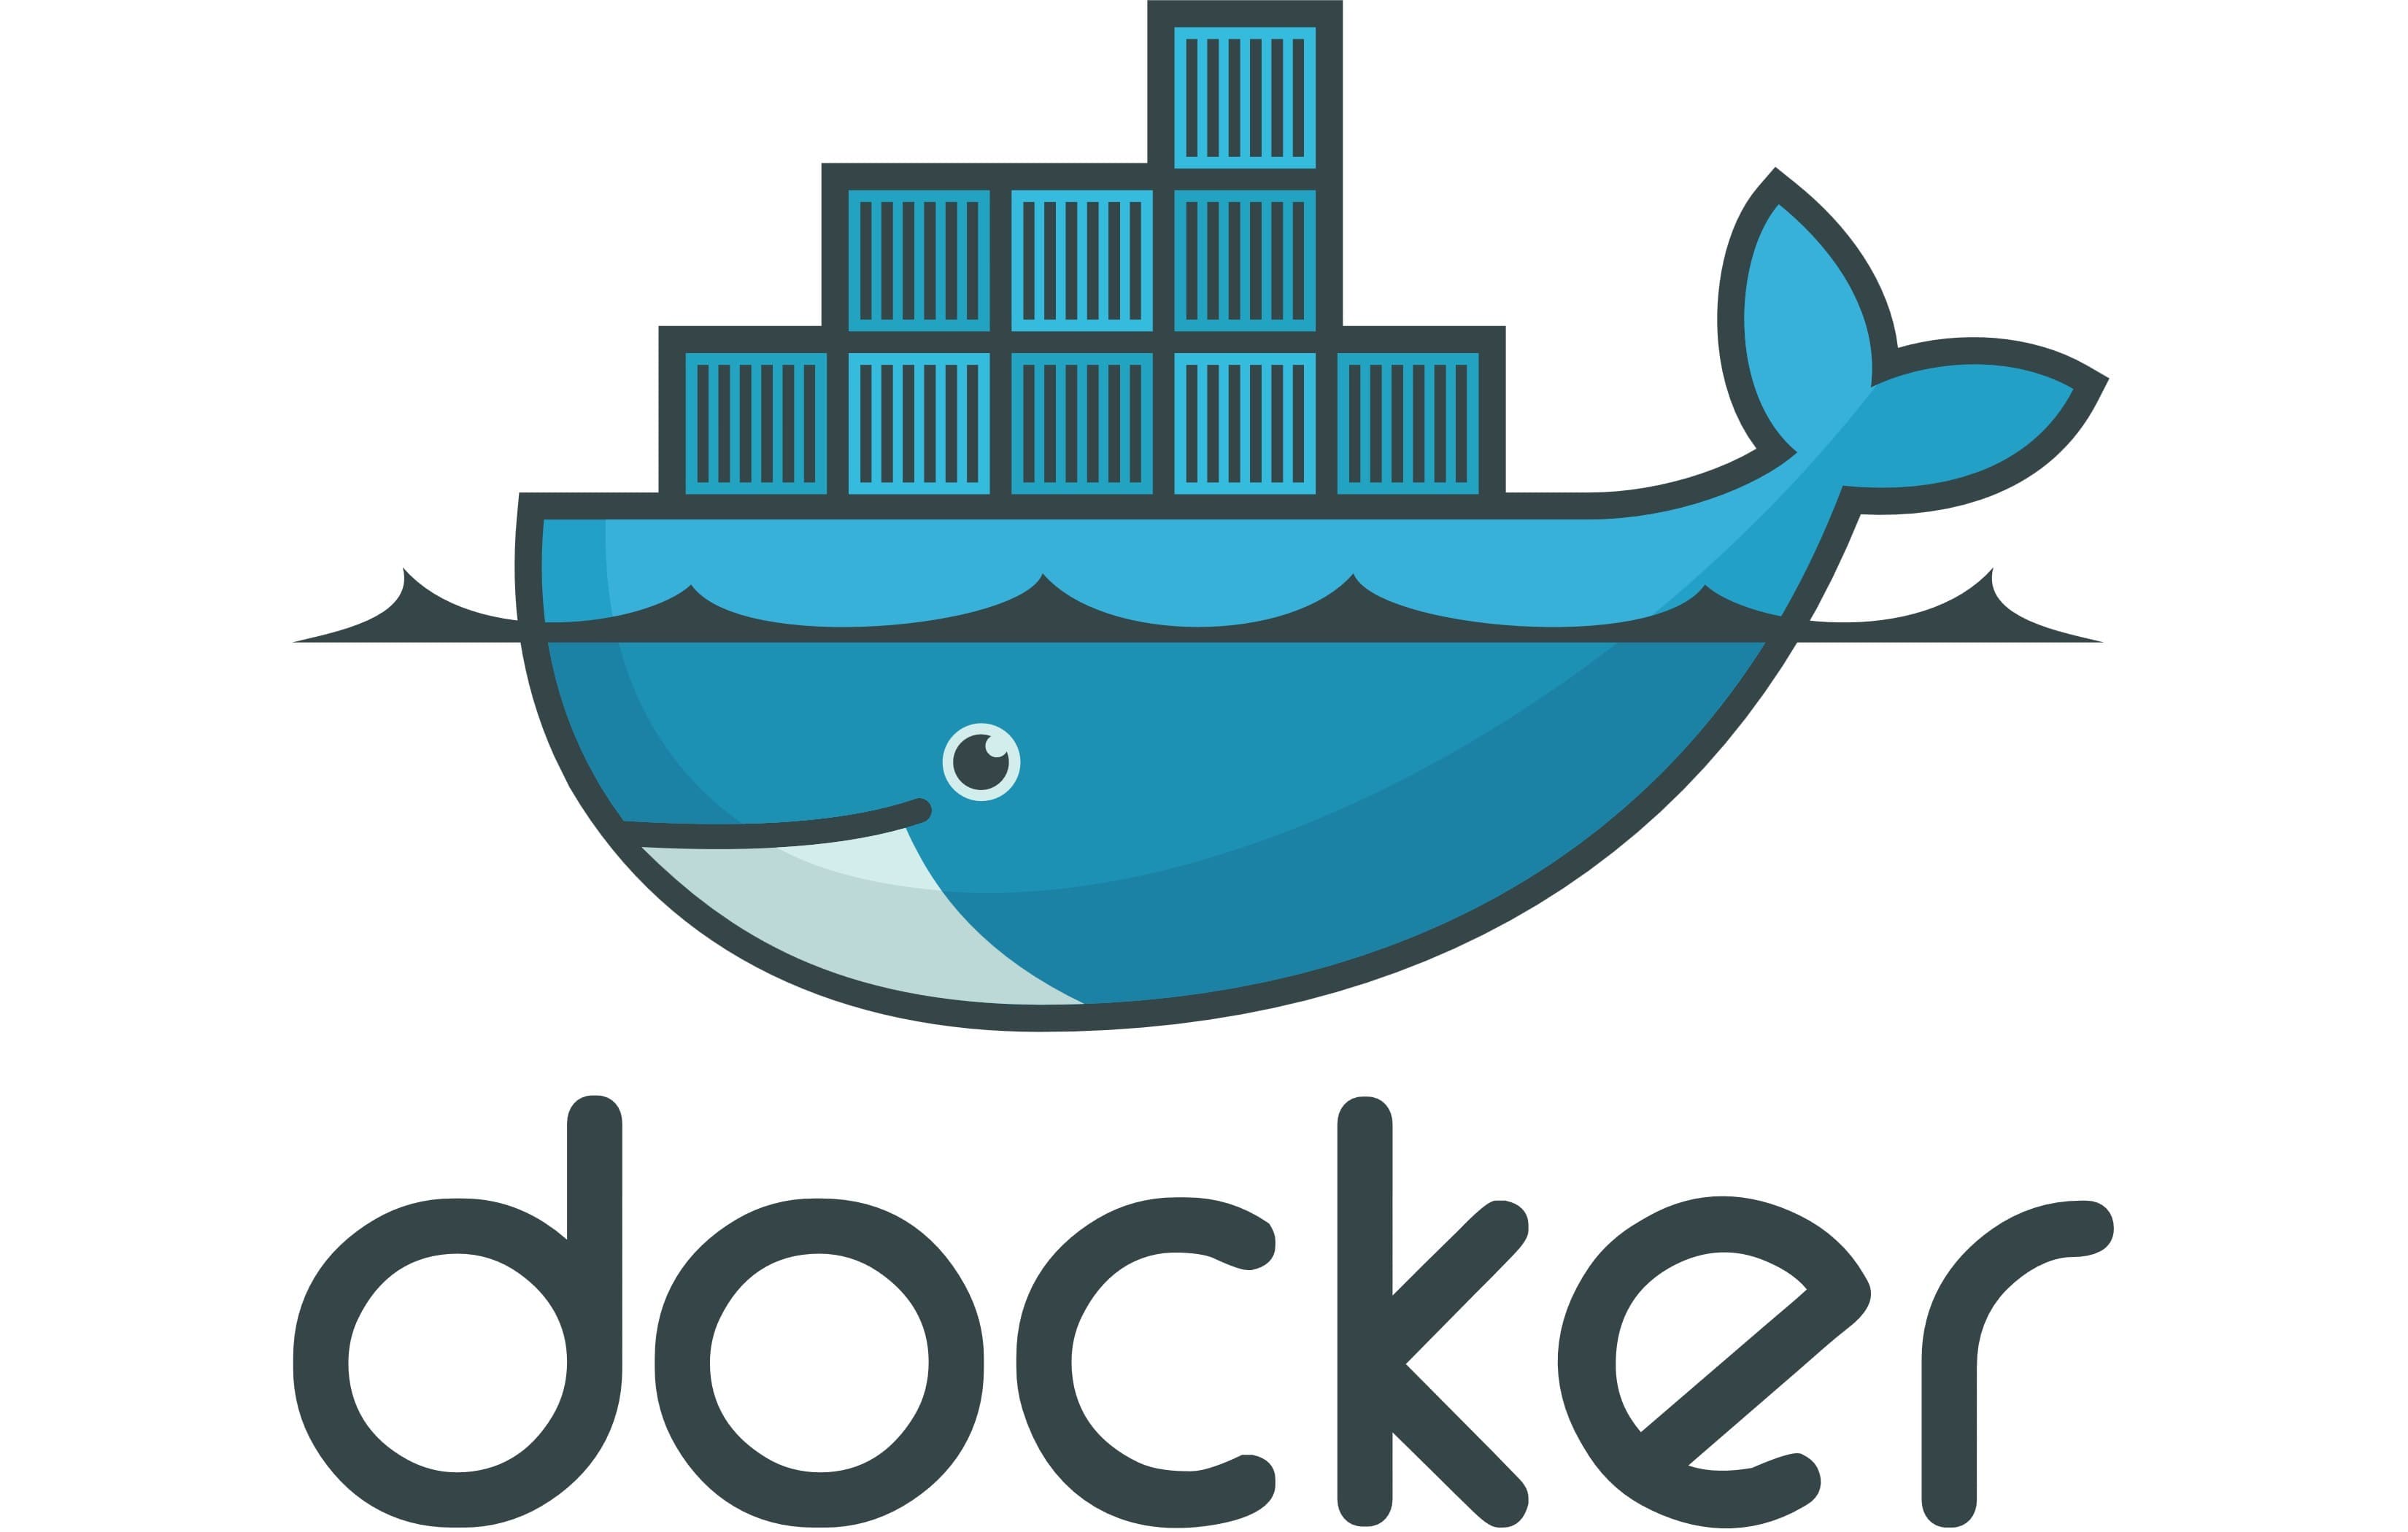 Docker helps developers build lightweight and portable software containers that simplify application development, testing, and deployment.